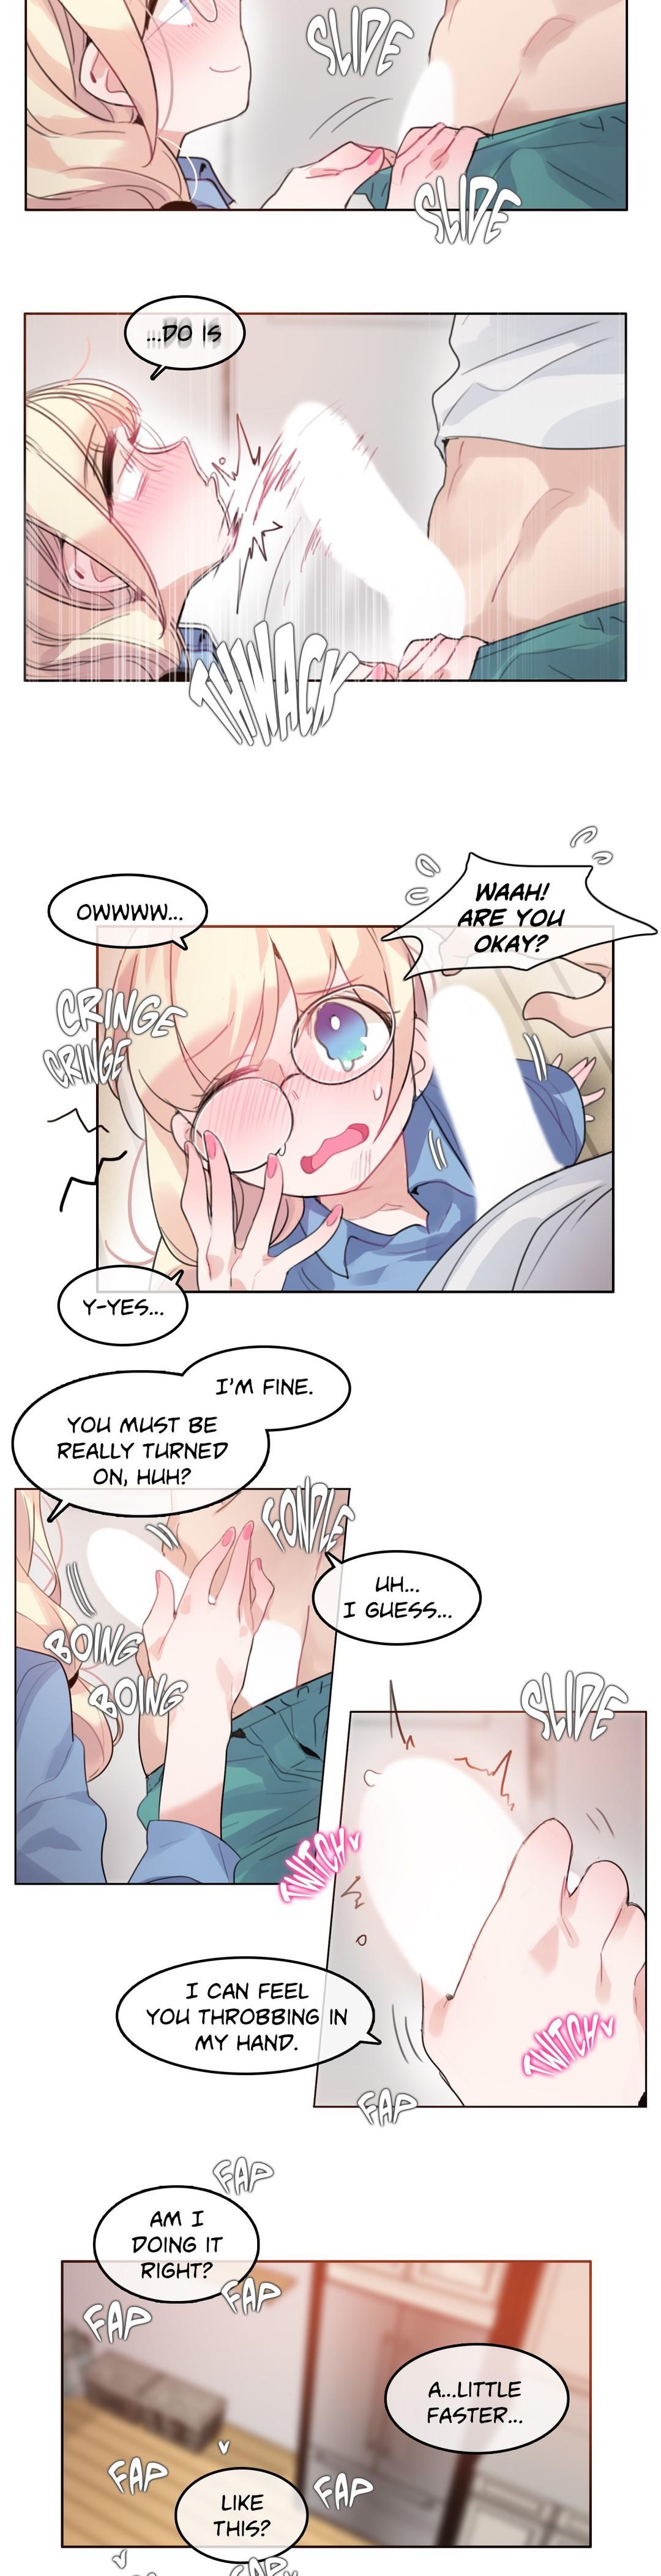 A Pervert's Daily Life Ch. 1-34 641